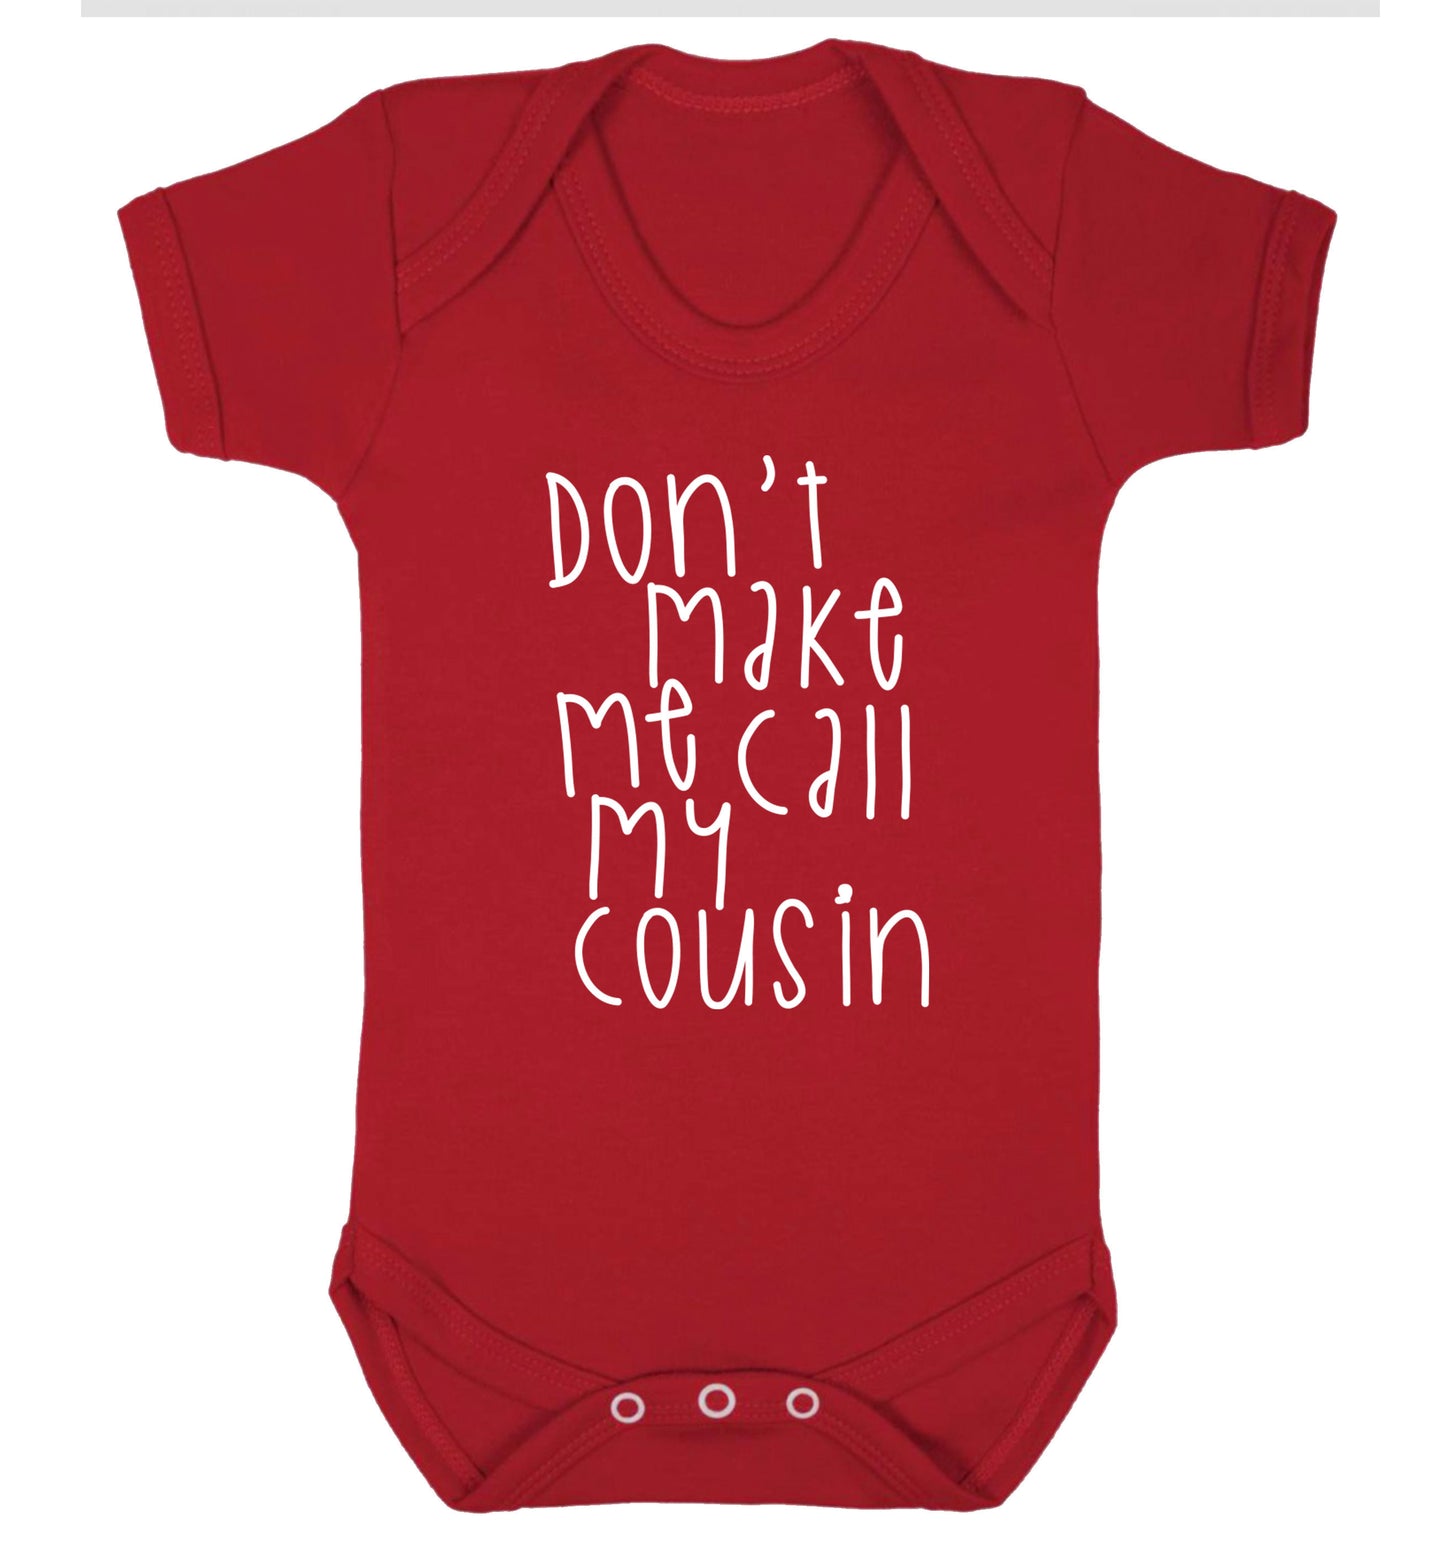 Don't make me call my cousin Baby Vest red 18-24 months